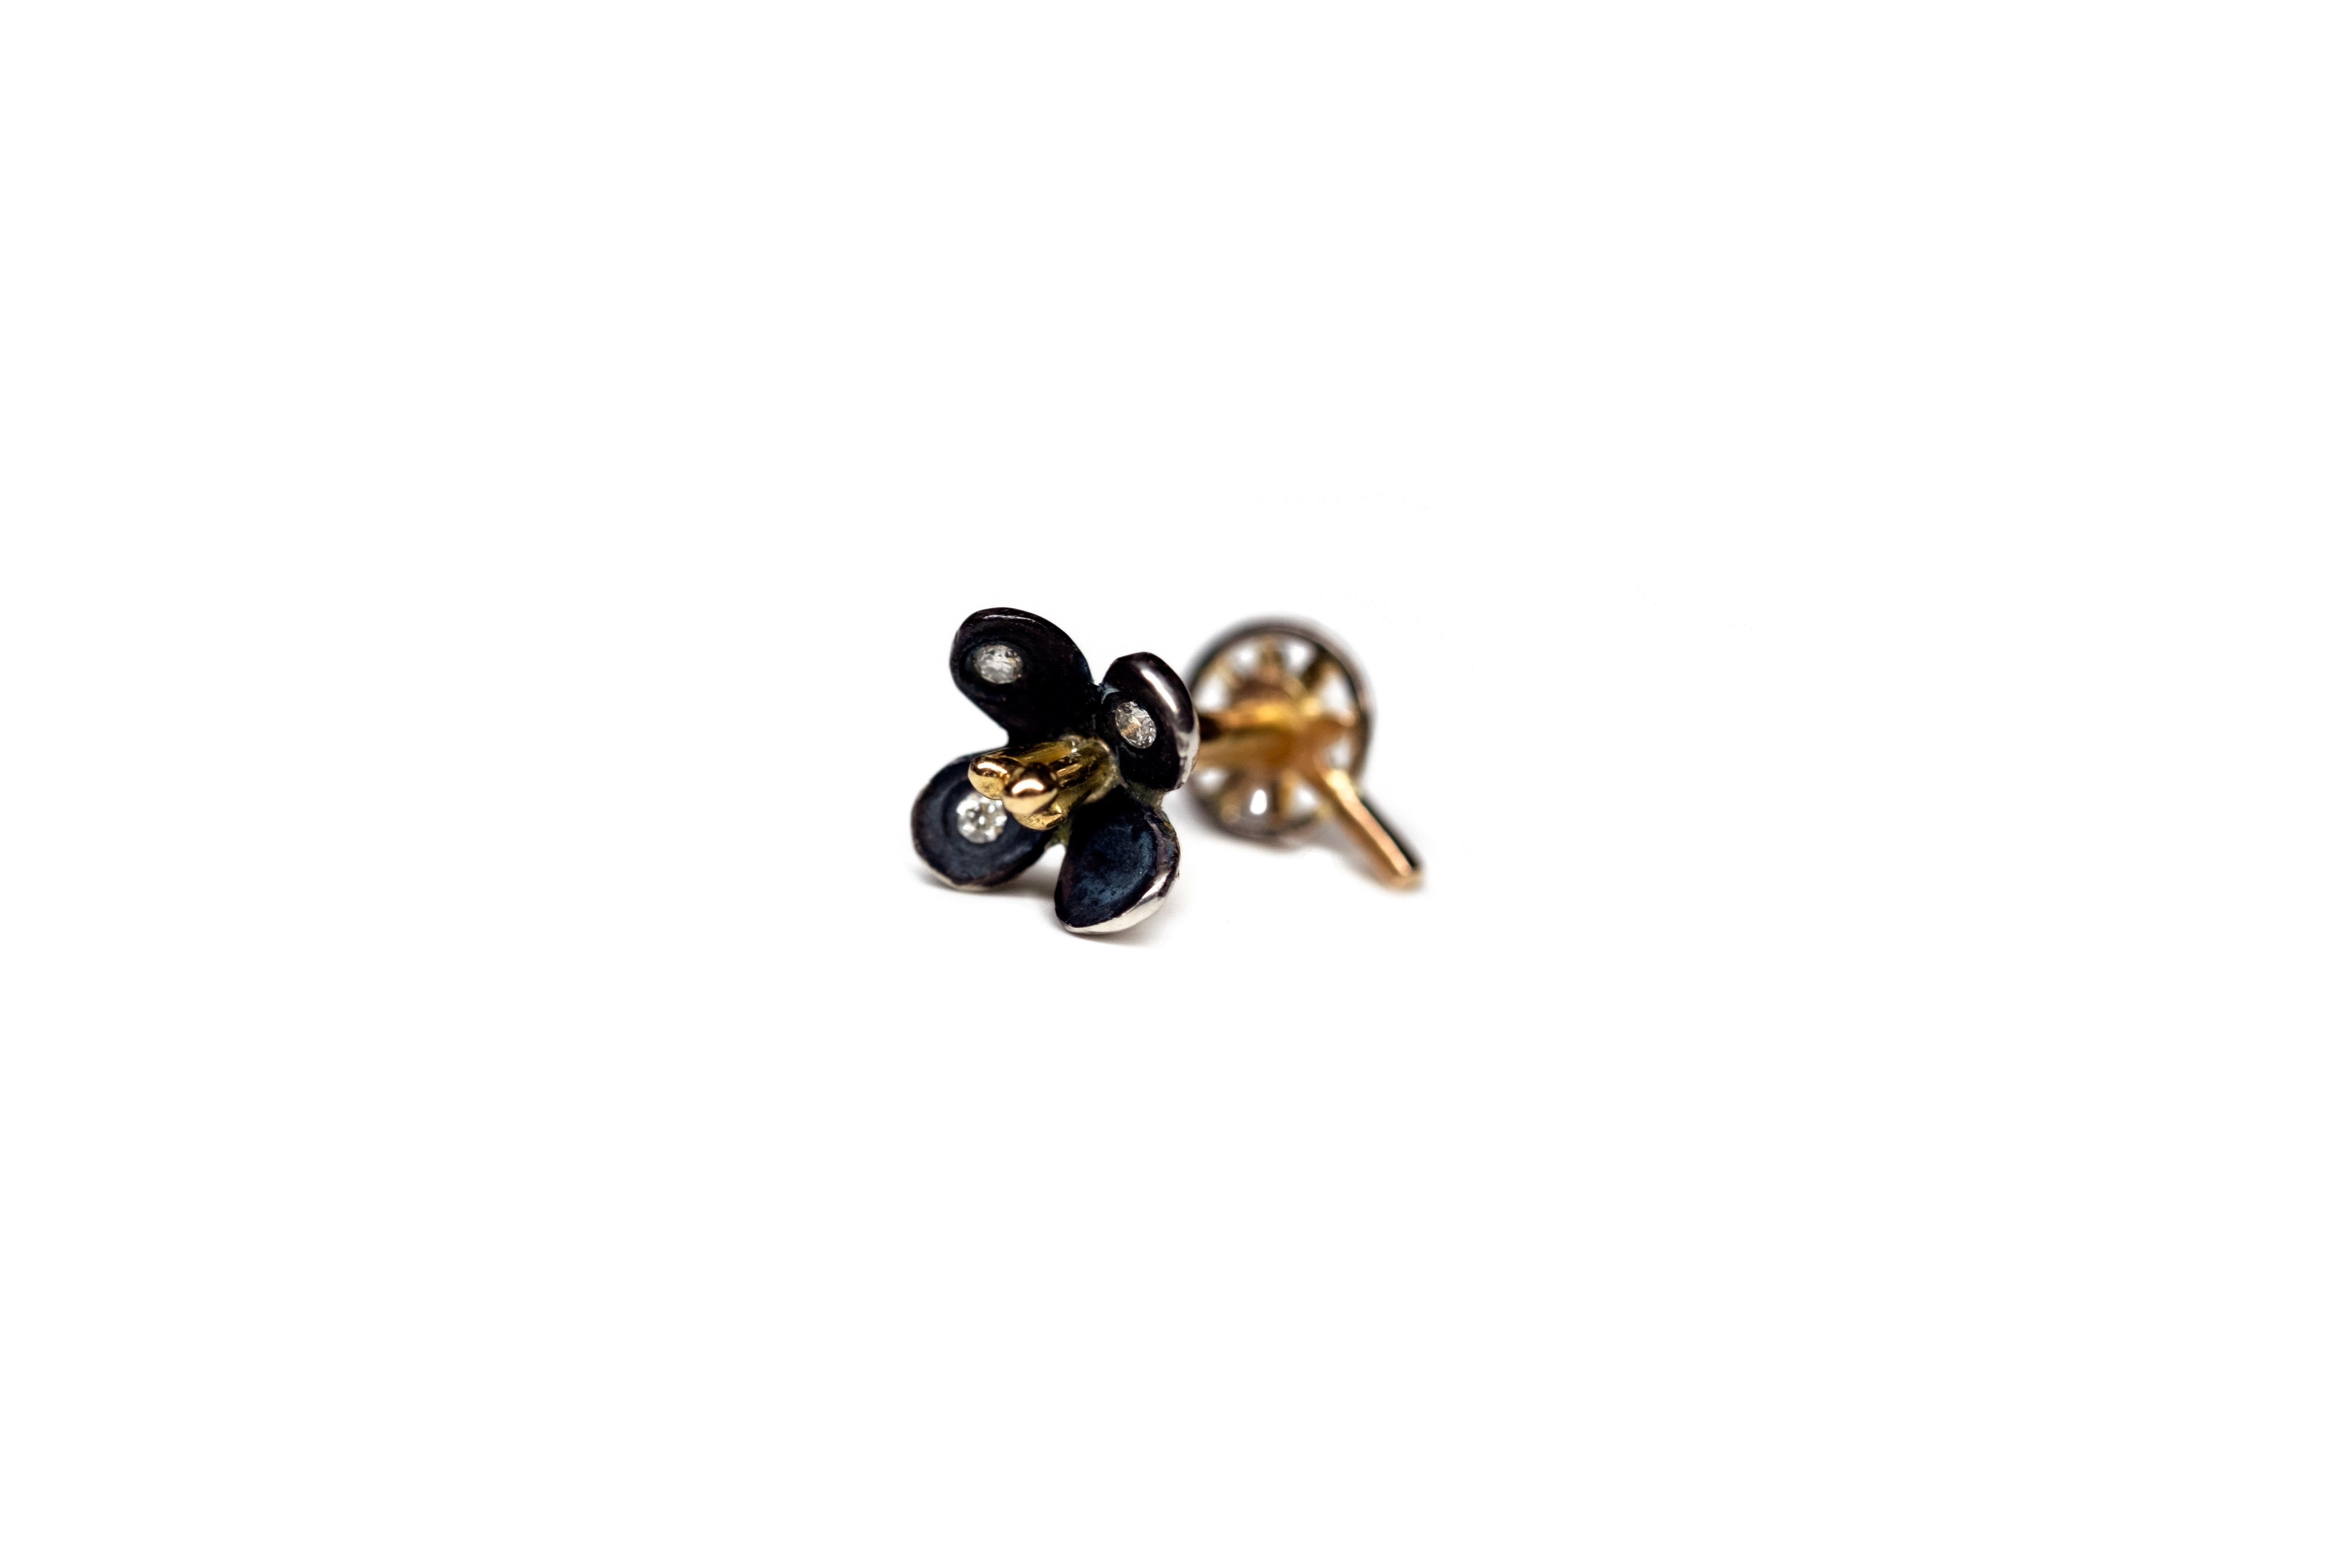 Flower-shaped ear piercing, completely handmade from 18K yellow Fairmined gold and silver, Canadamark diamonds.

The flower screws into the star at the back. The screw is handmade. We suggest closing it gently and being careful not to force it.